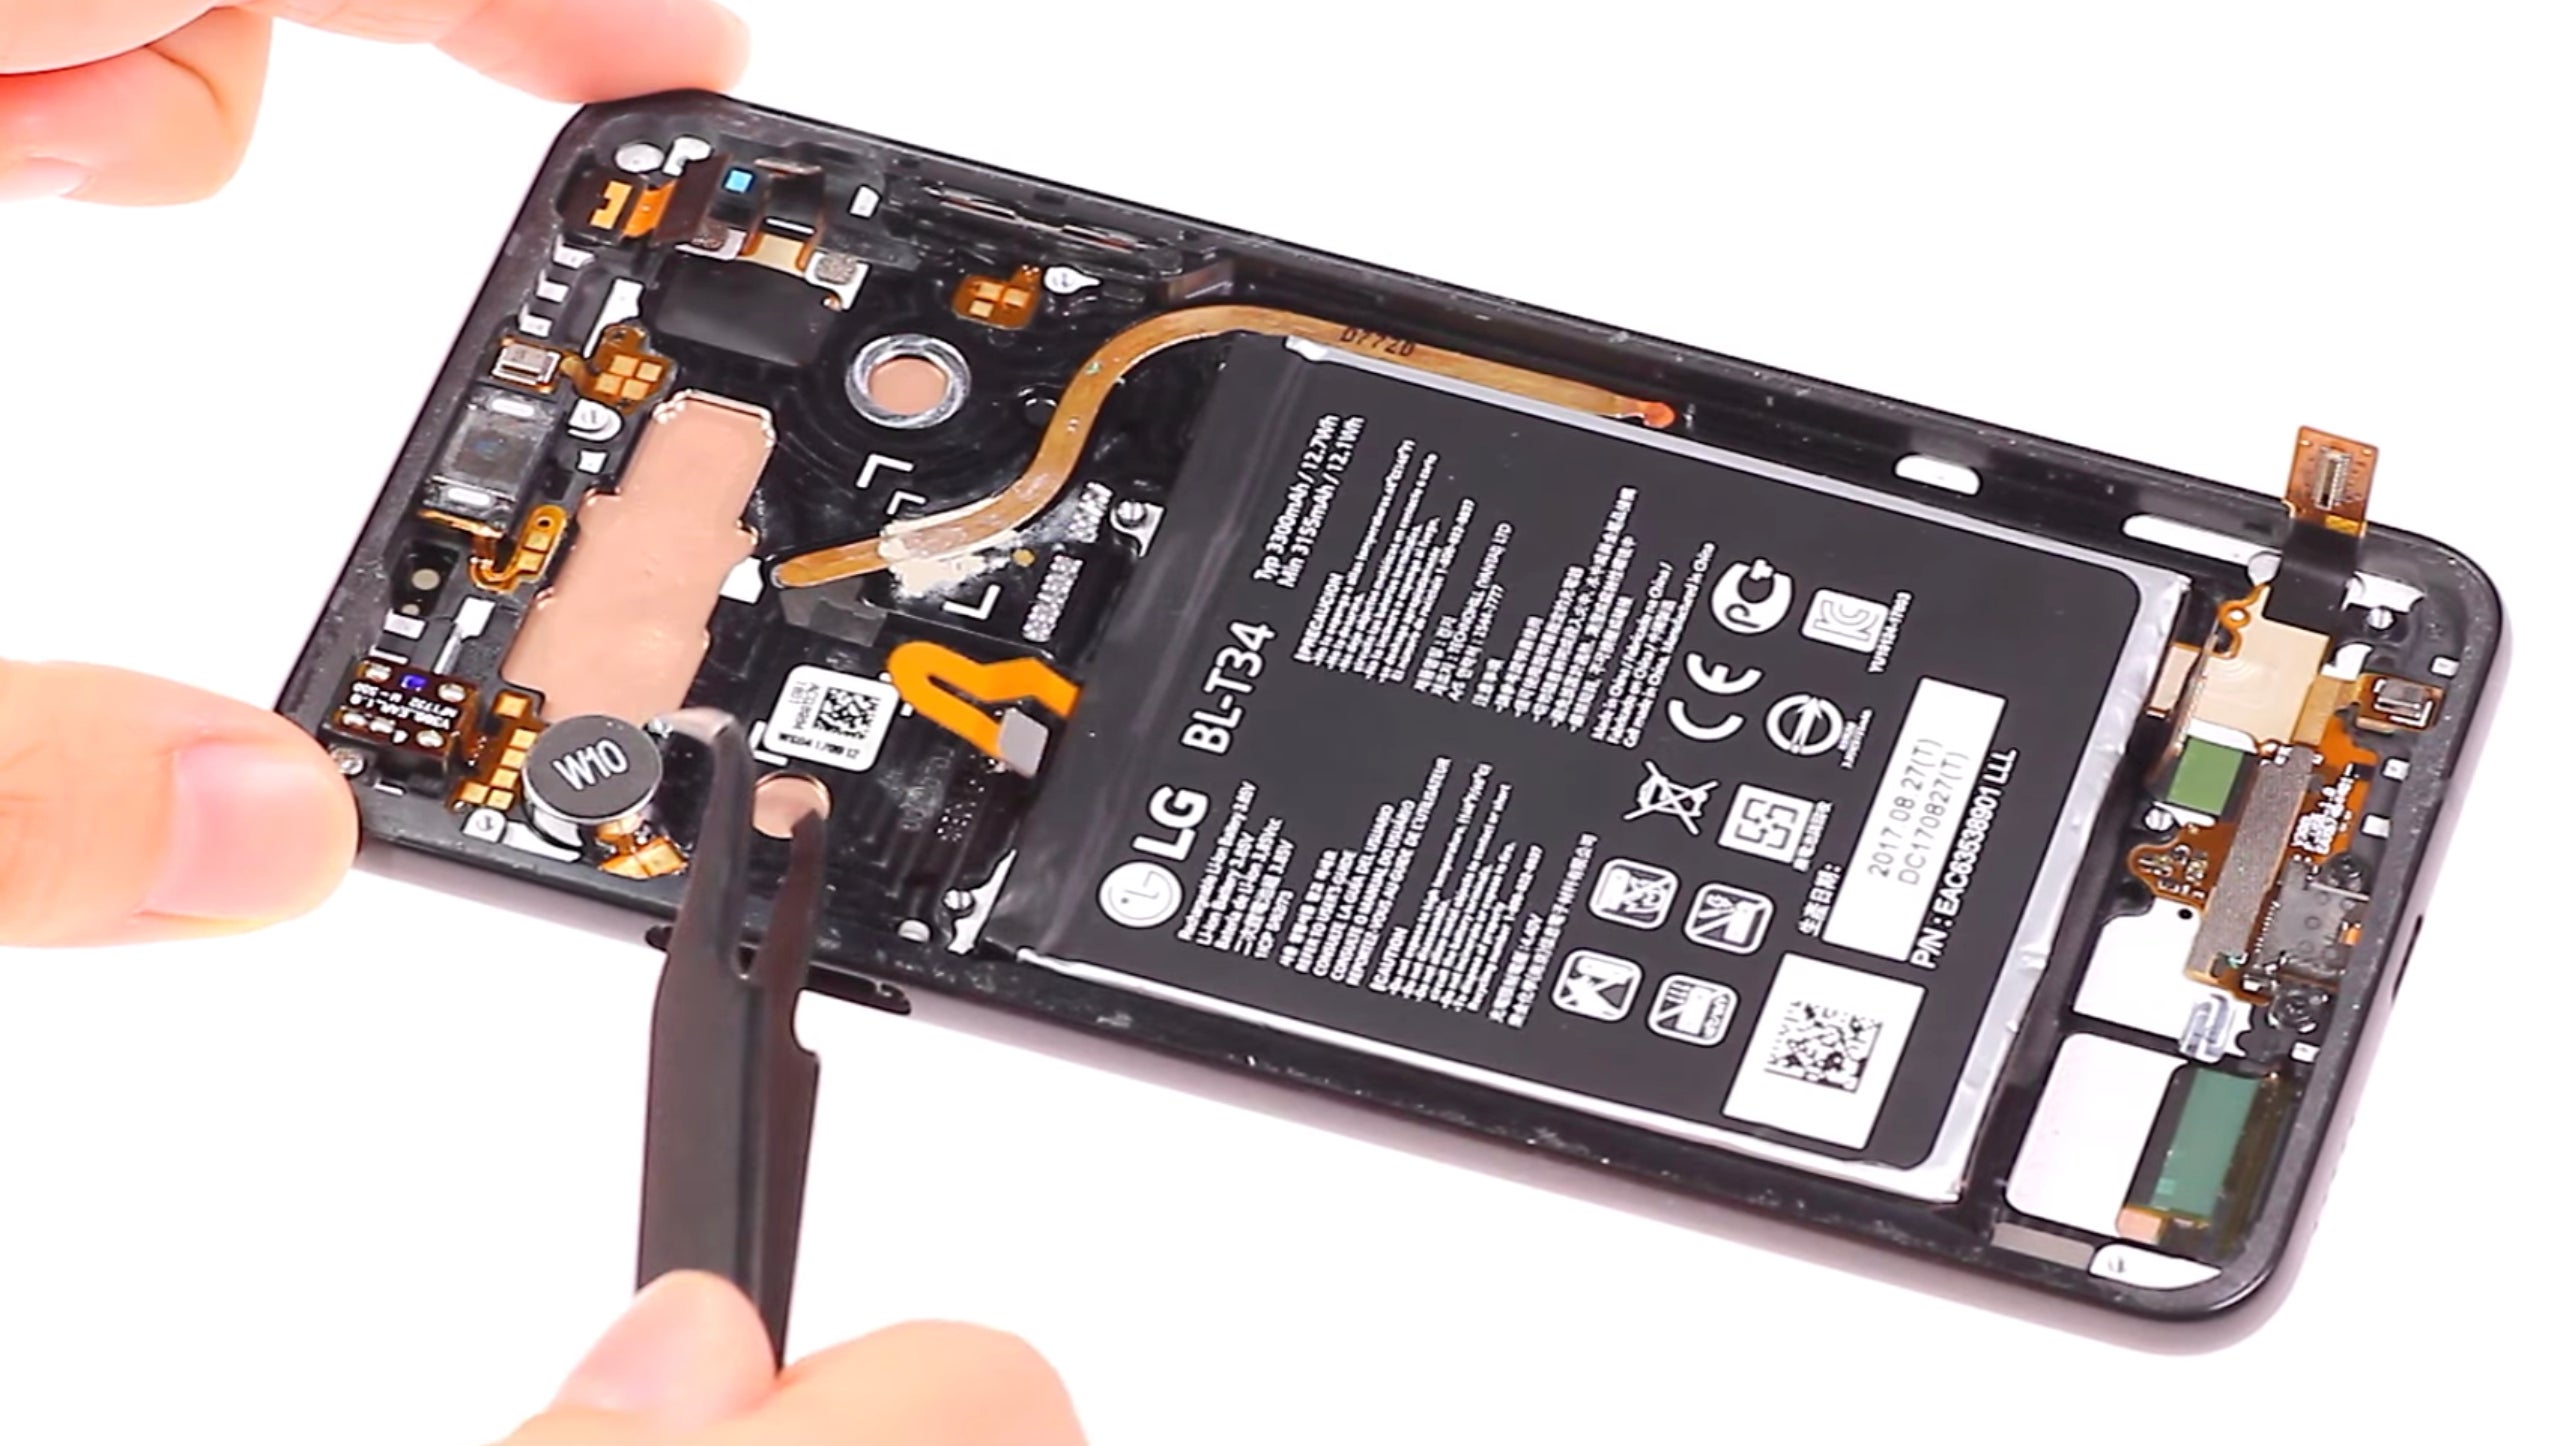 LG V30 vibration repair guide, by Wit Rigs - I wish more Android manufacturers would take vibration seriously